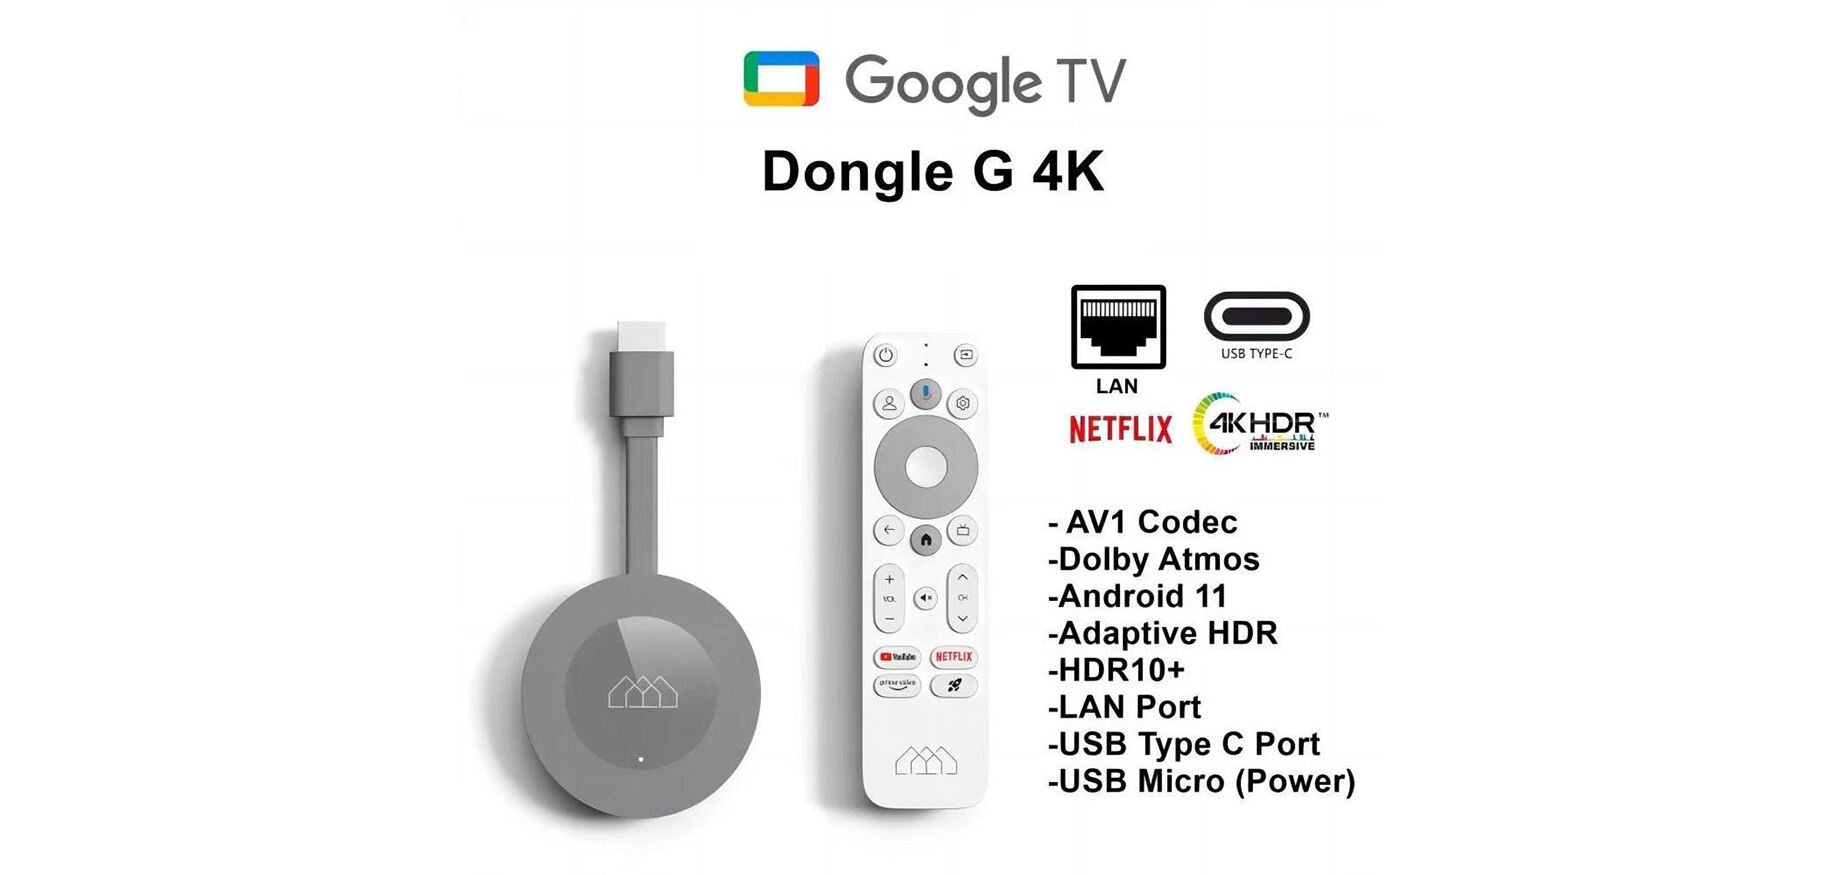 Dongle G 4K with Google TV 11 TV Stick with Google Certified TV Dongle